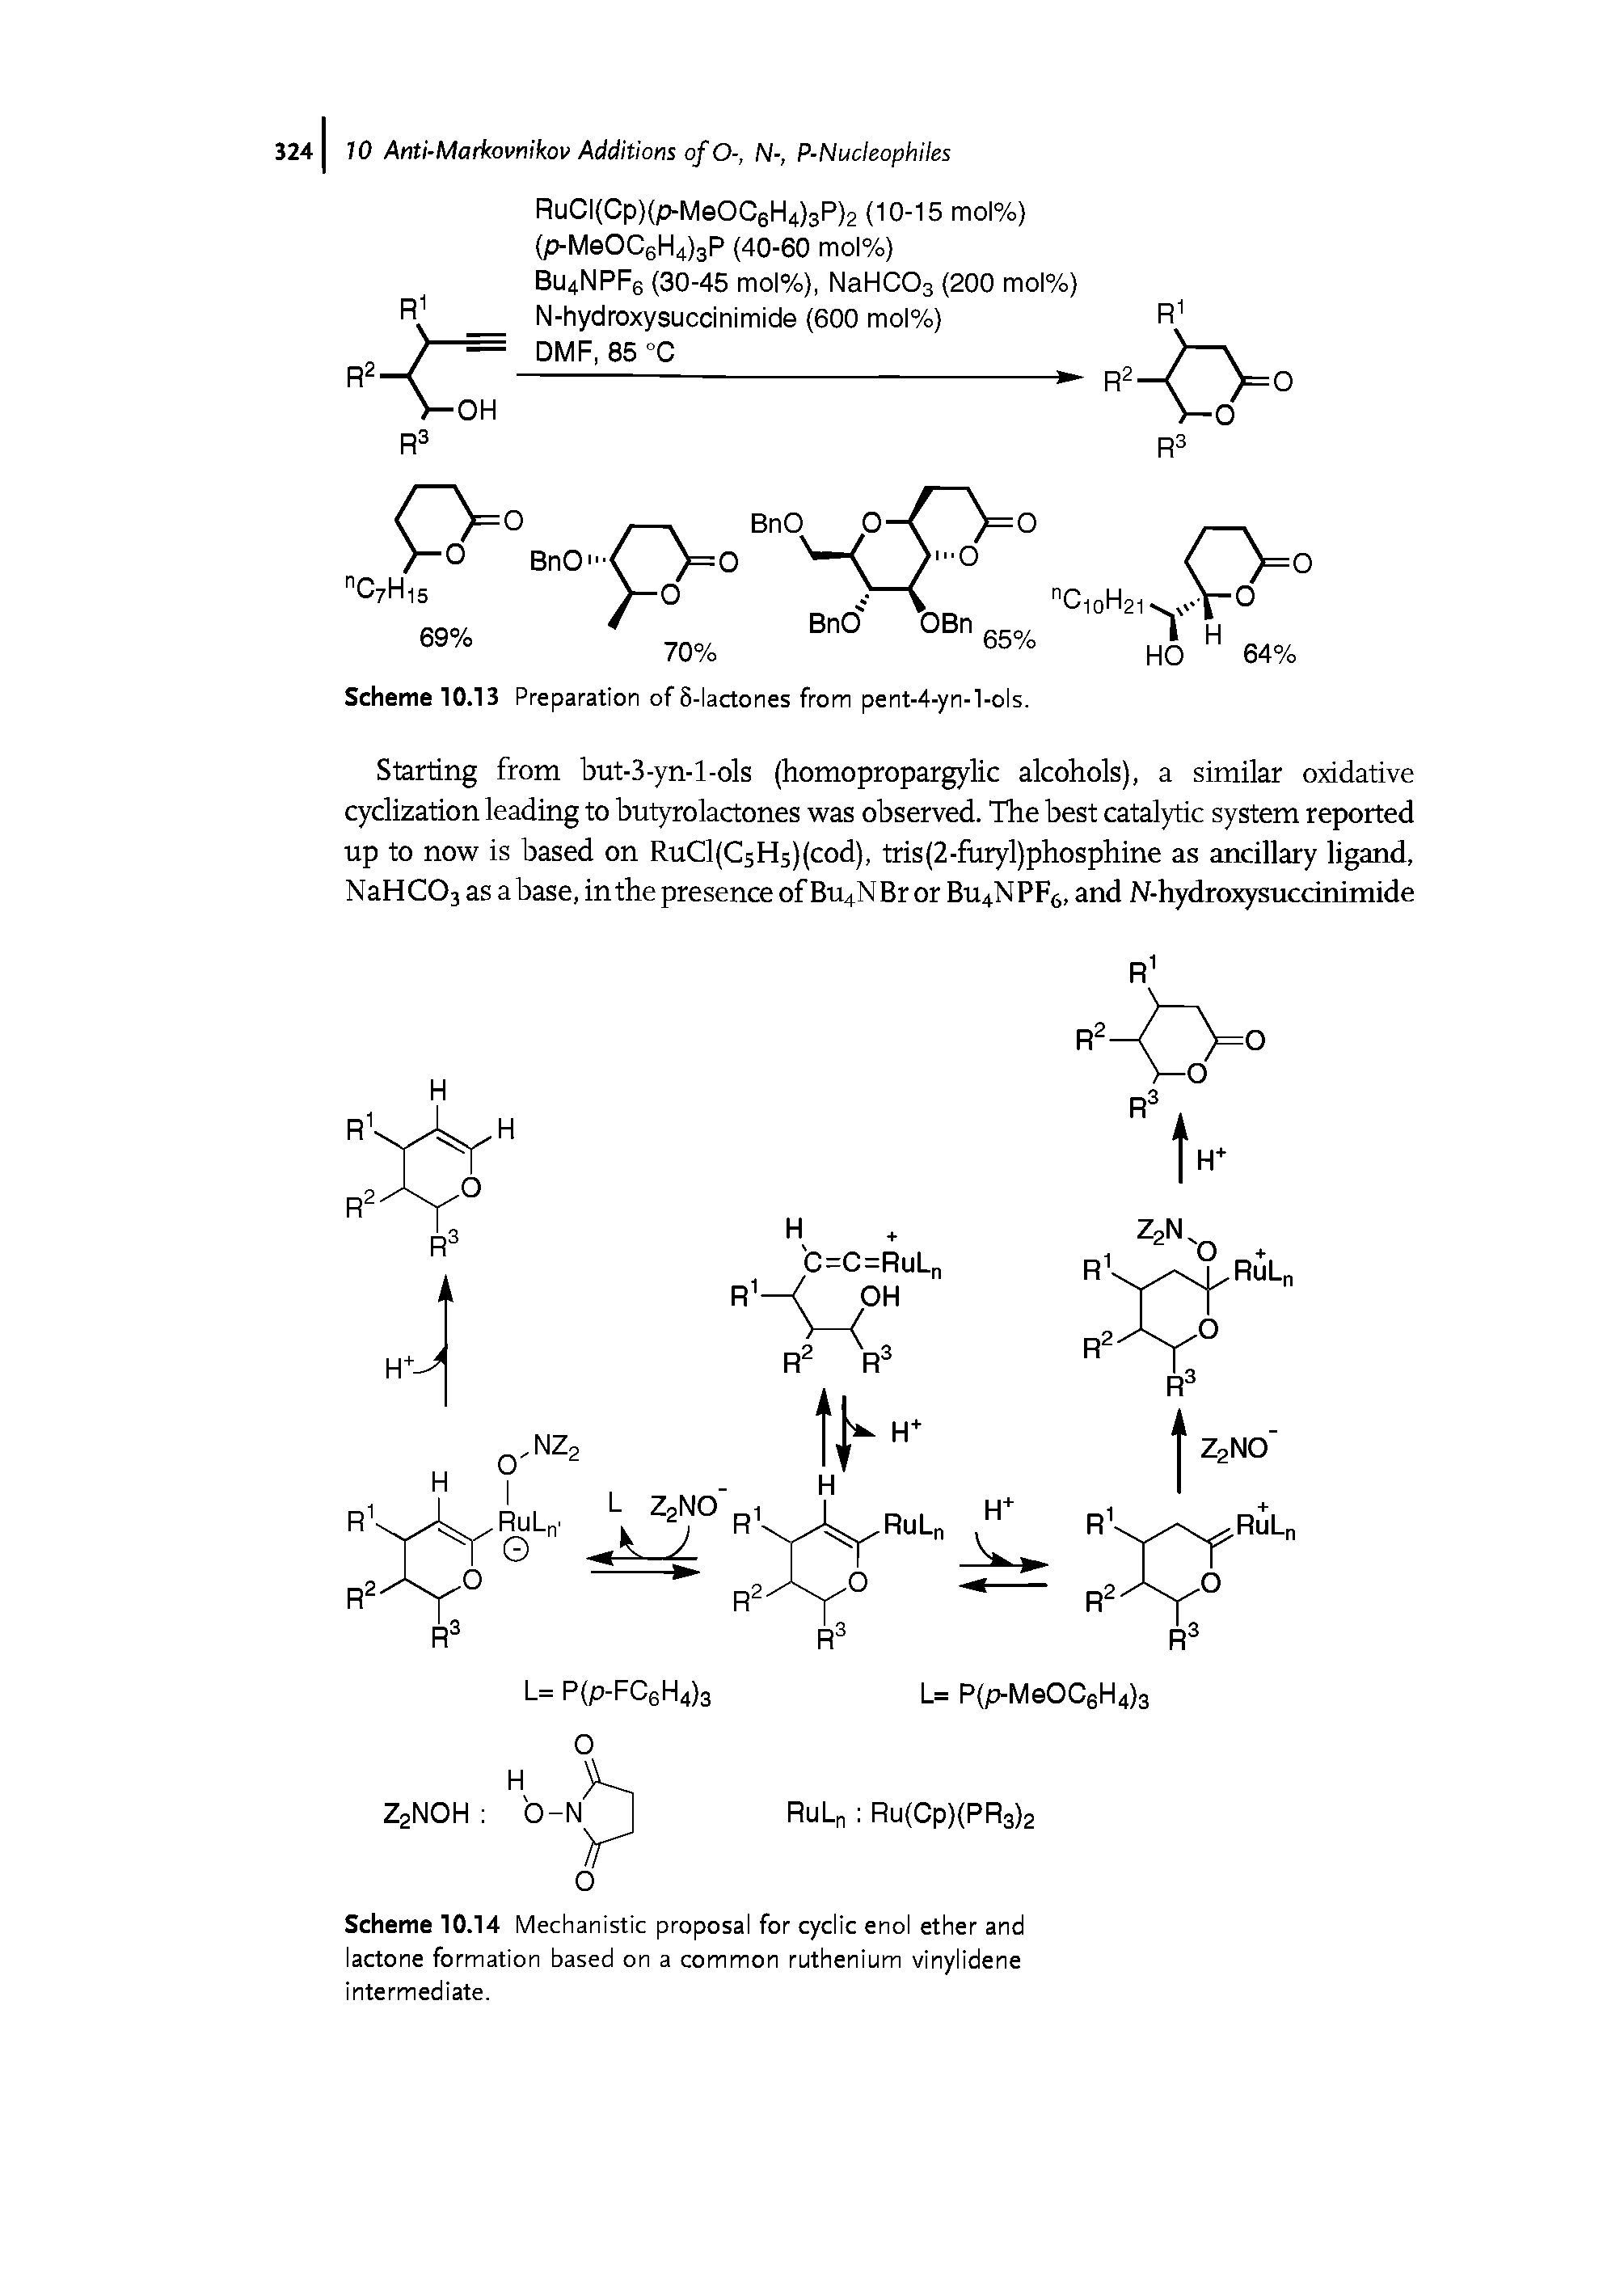 Scheme 10.14 Mechanistic proposal for cyclic enol ether and lactone formation based on a common ruthenium vinylidene intermediate.